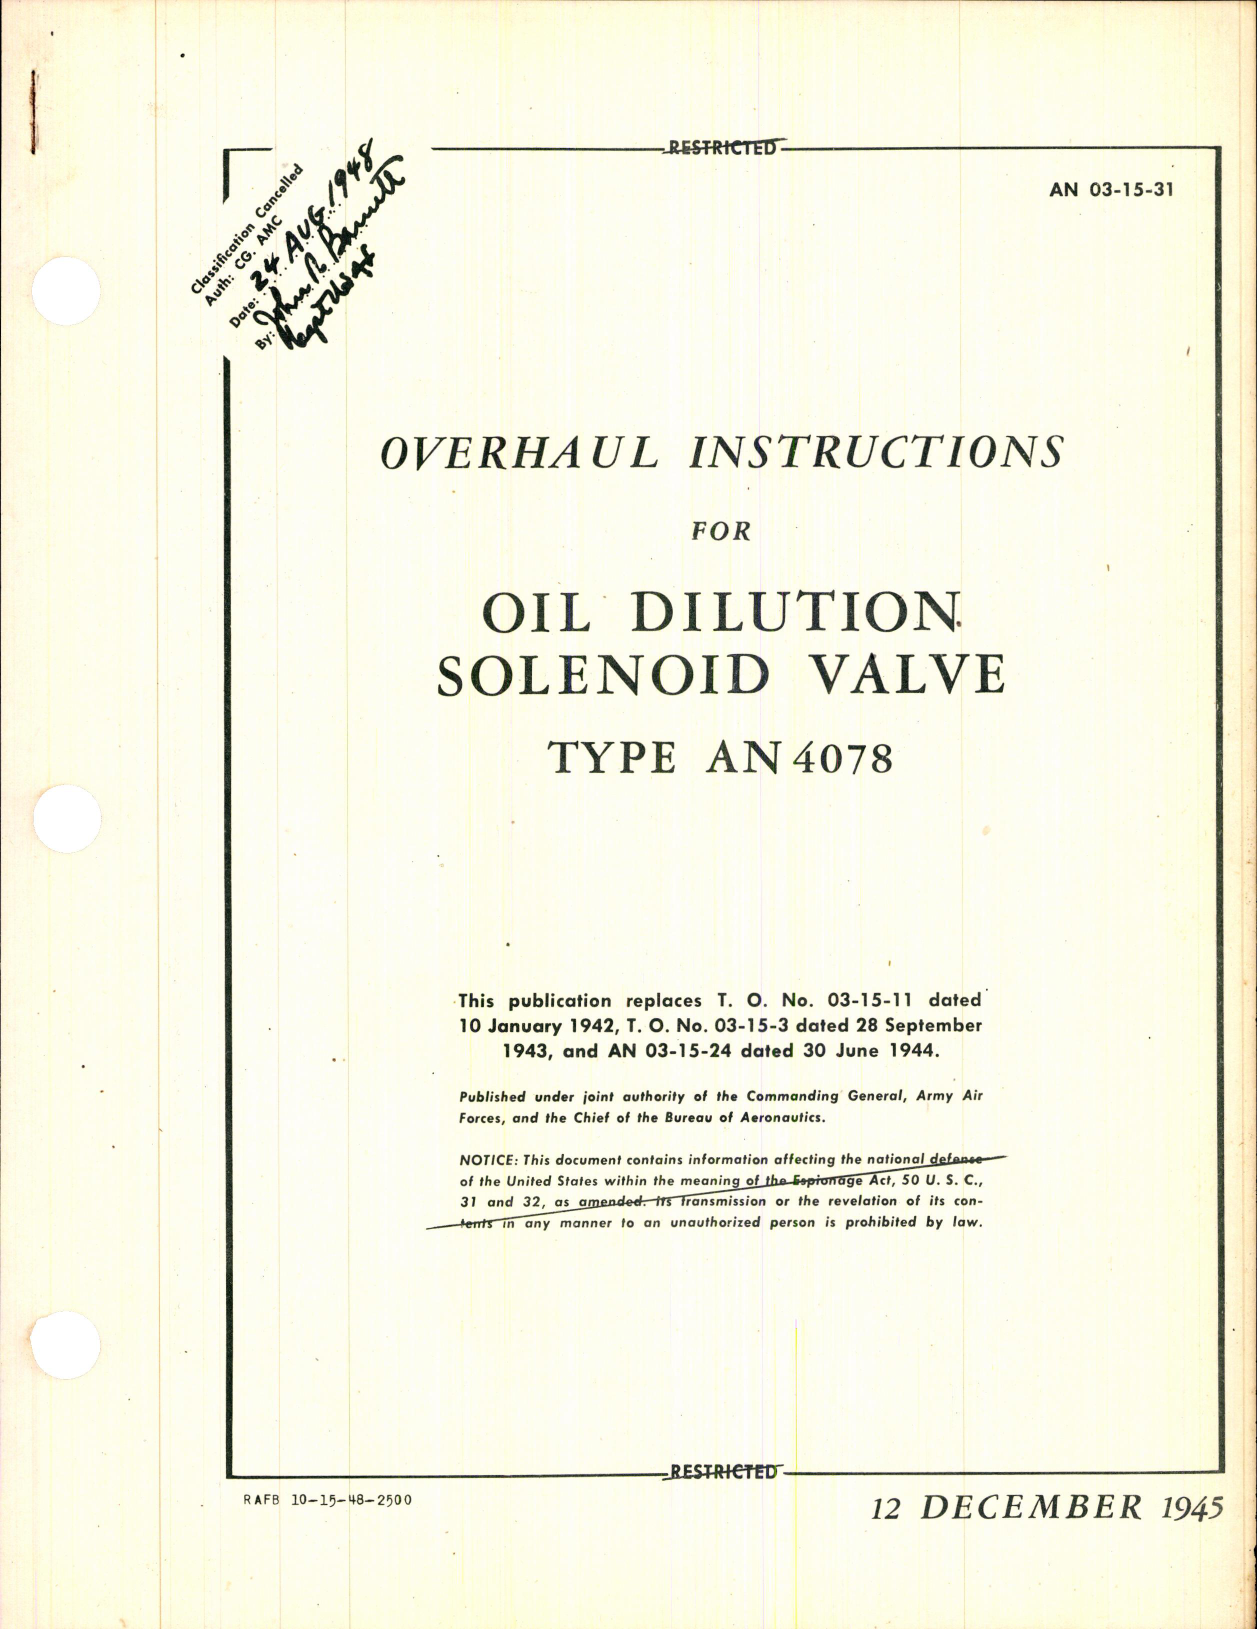 Sample page 1 from AirCorps Library document: Overhaul Instructions for Oil Dilution Solenoid Valve Type AN 4078